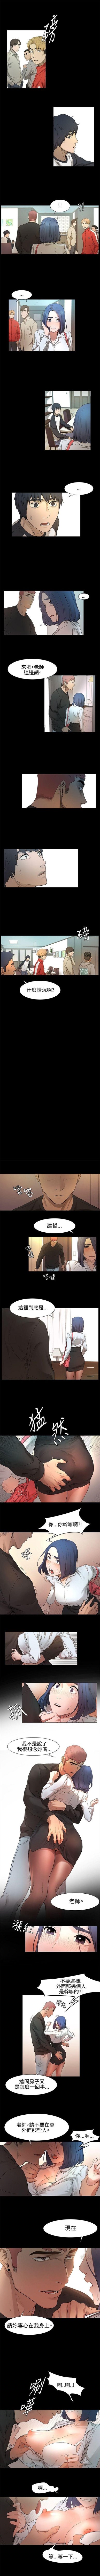 Brother 衝突 1-104官方中文（連載中） Analfuck - Page 11